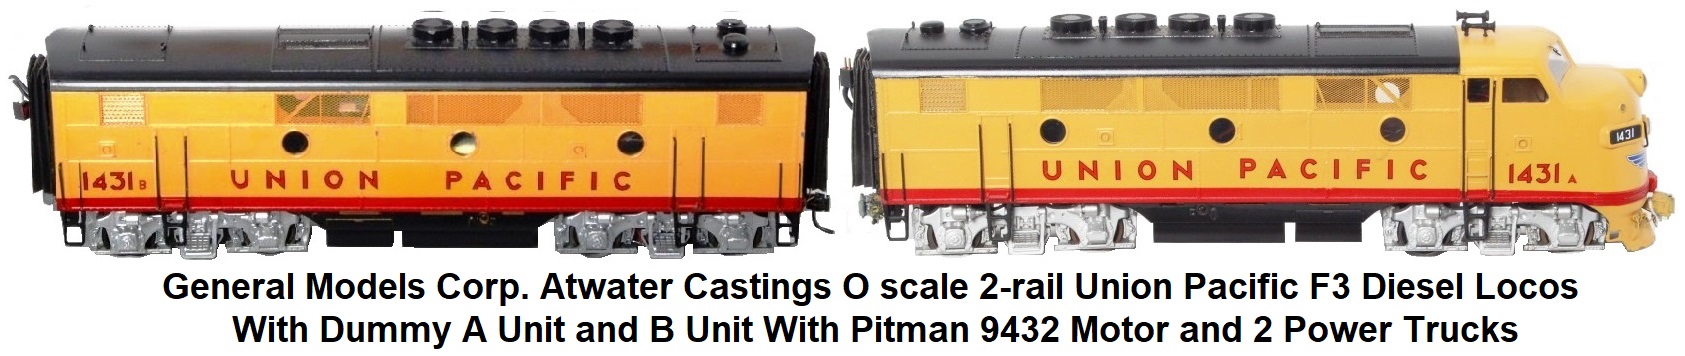 General Models Corp. O scale 2-rail Union Pacific F3 diesel locomotives made of Atwater castings, dummy A unit and B unit with both trucks powered by a Pitman 9432 motor